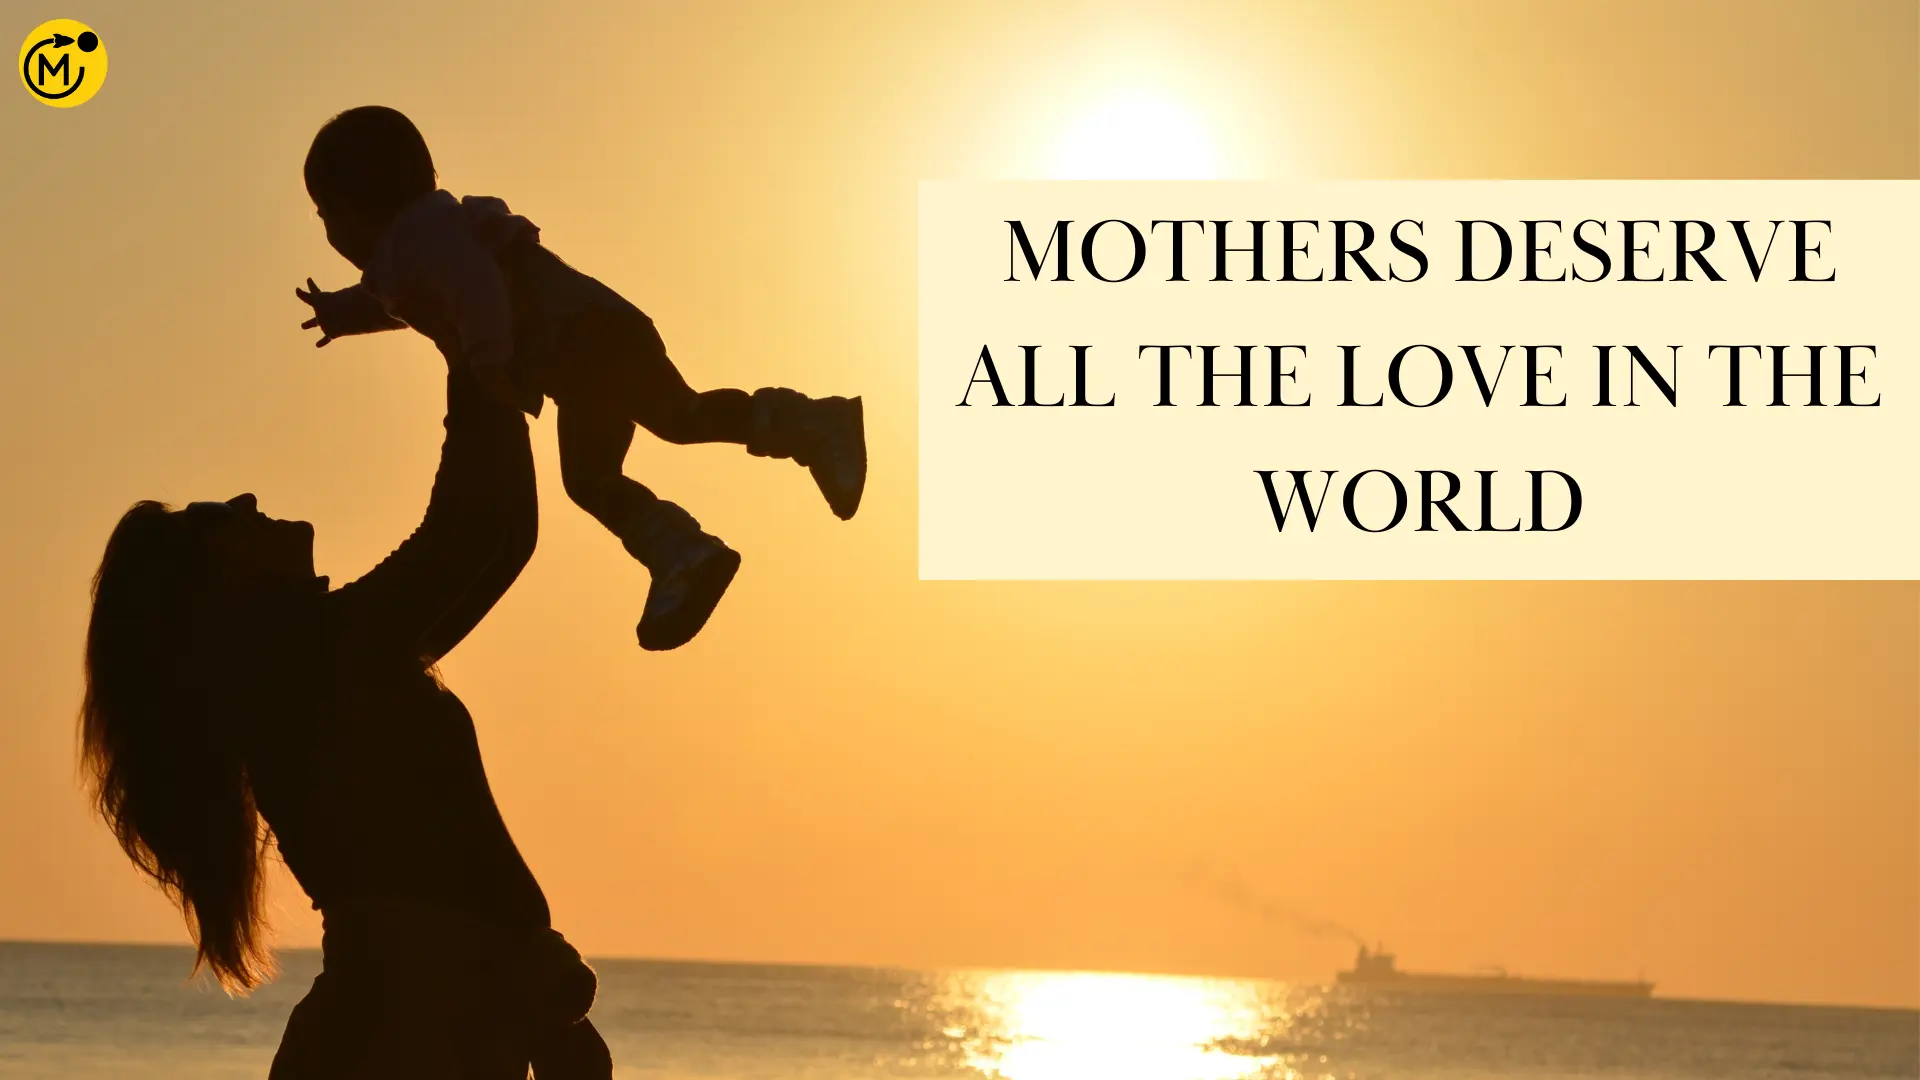 Mothers deserve all the love in the World